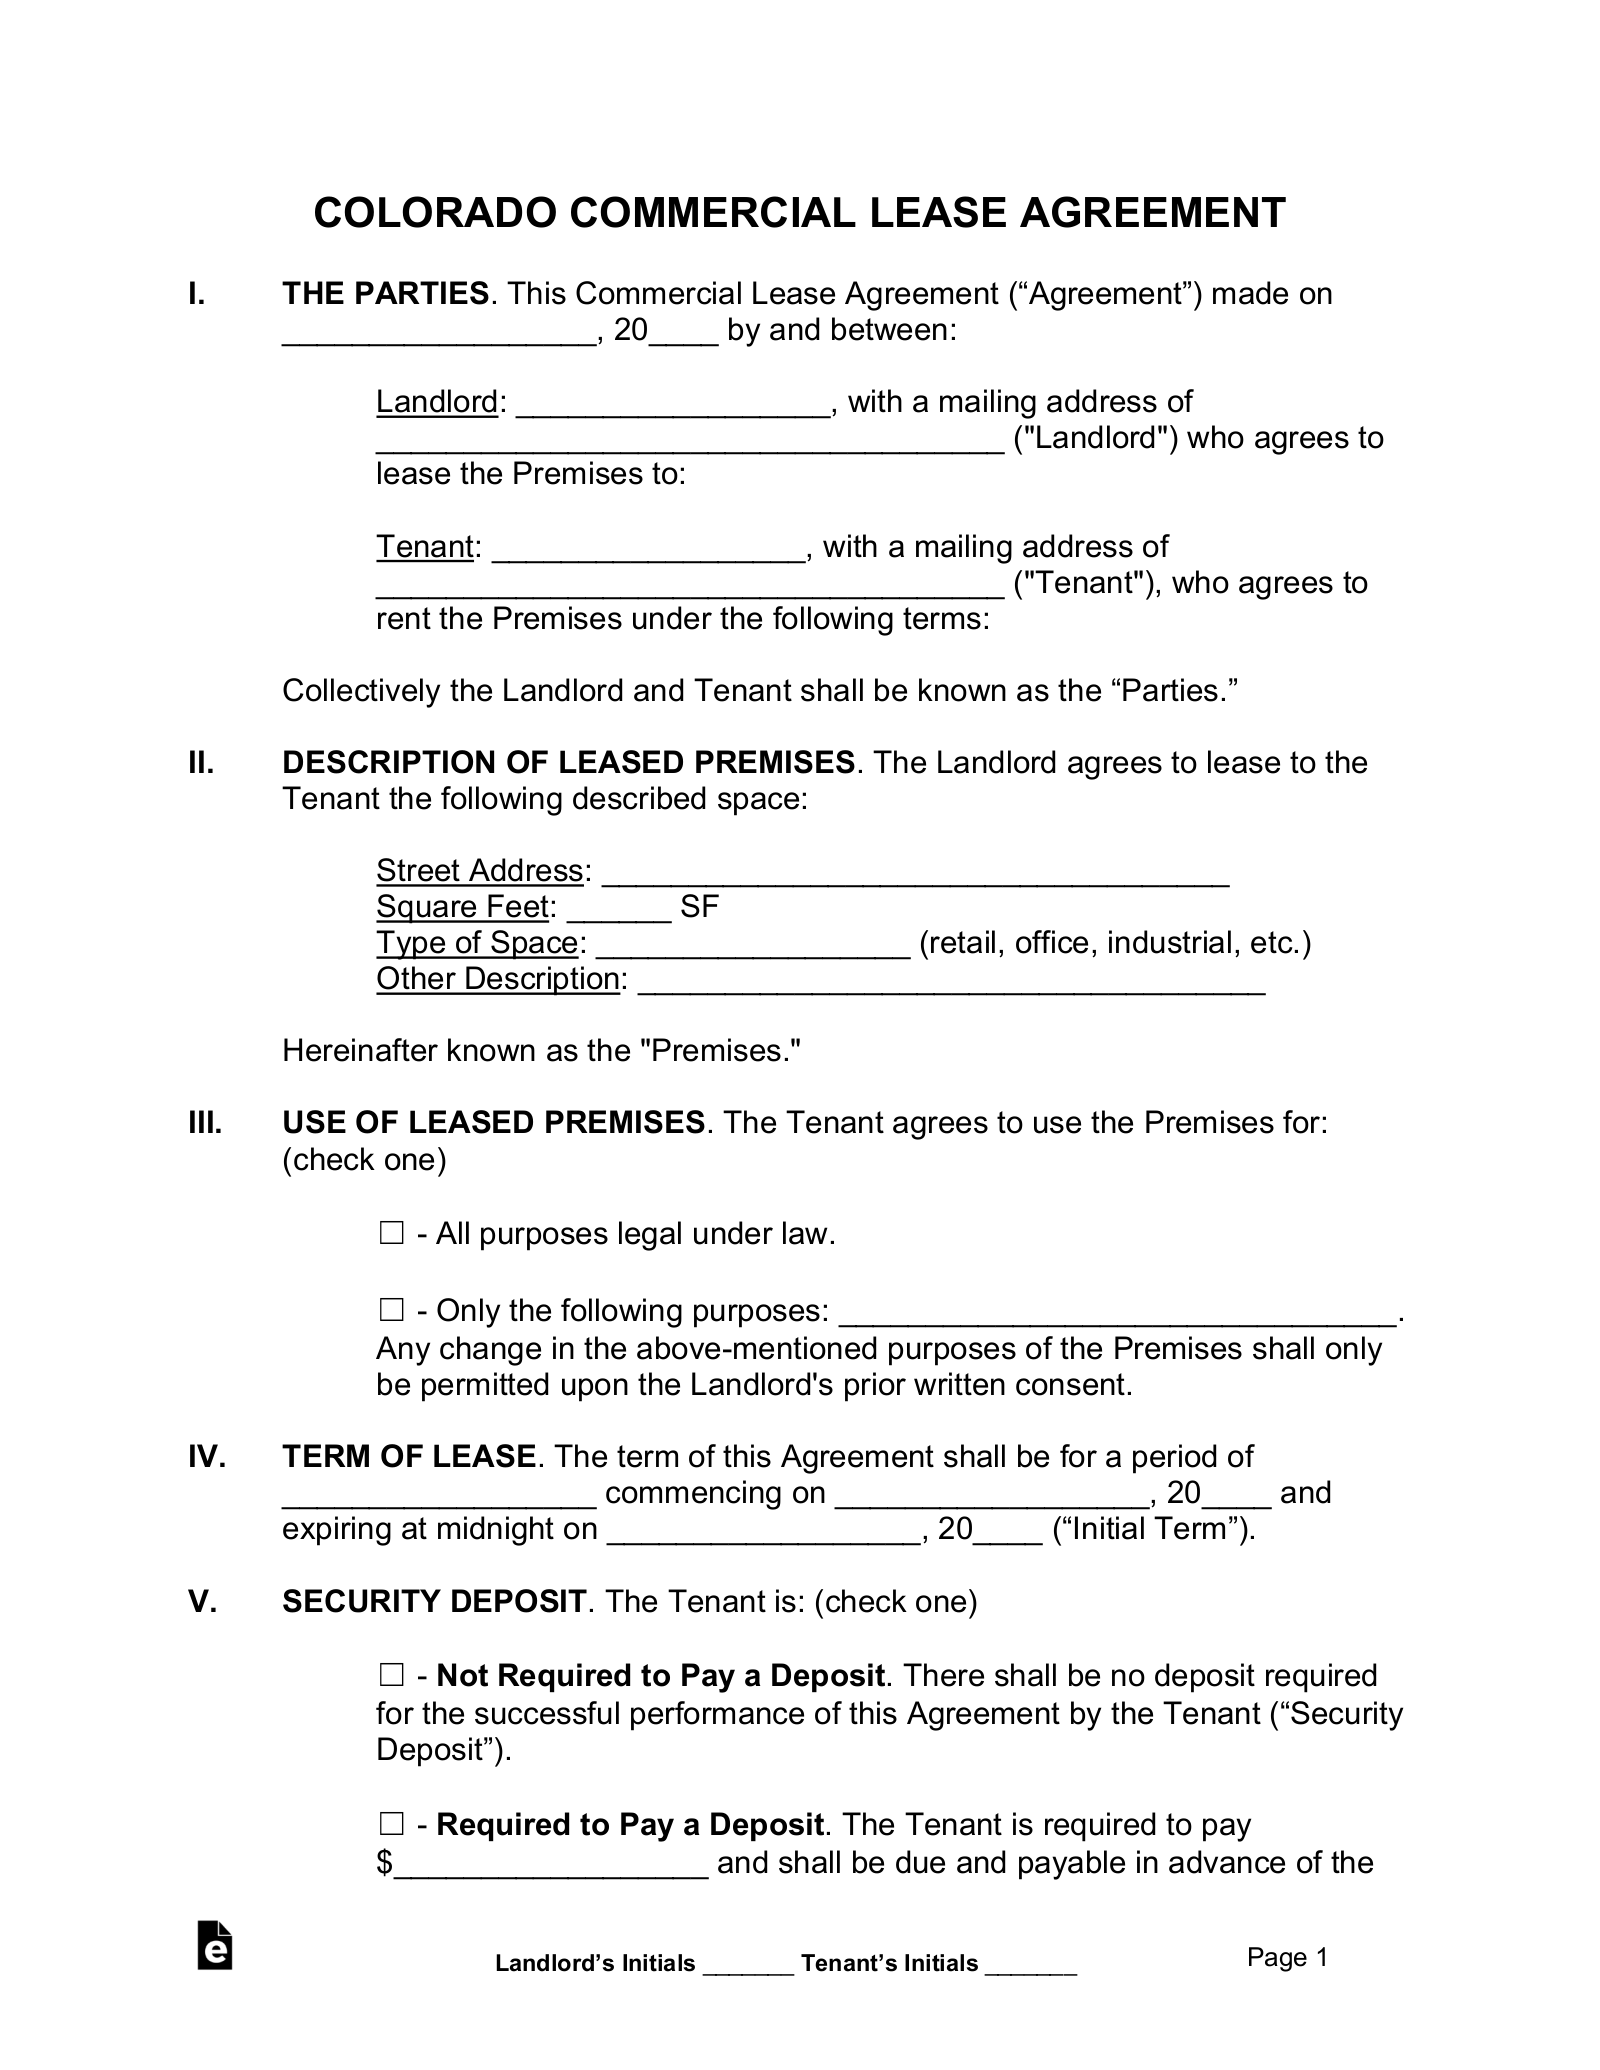 free-colorado-commercial-lease-agreement-template-pdf-word-eforms